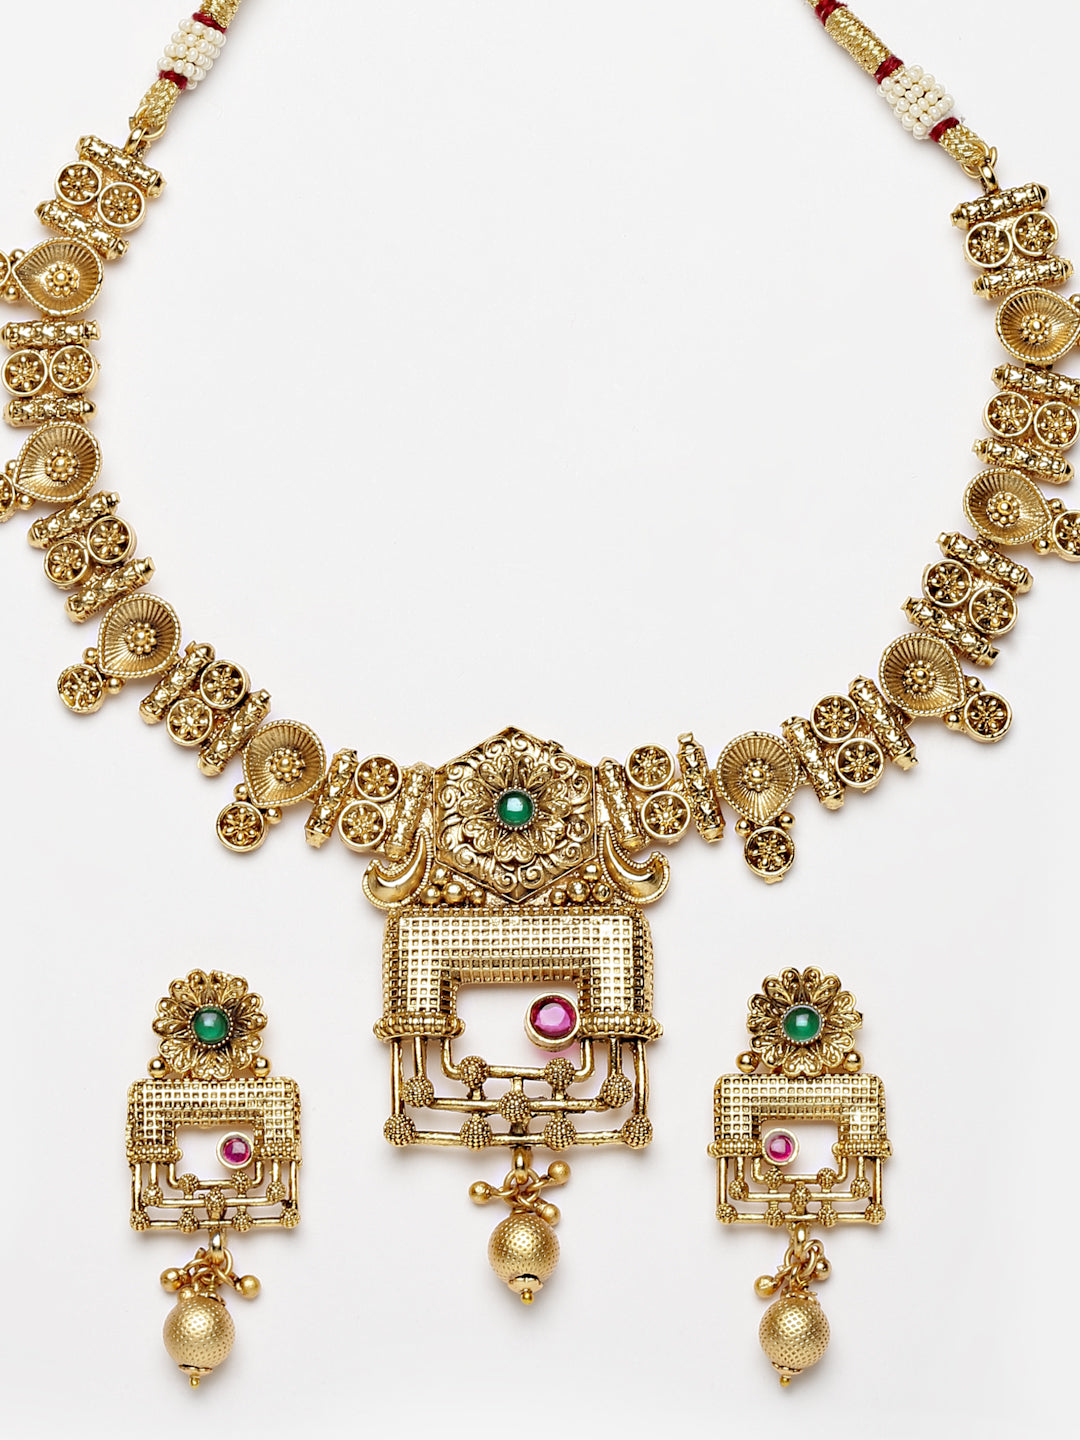 Arrabi Gold Handcrafted Jewellery Set with 2 Earrings(30 cm)